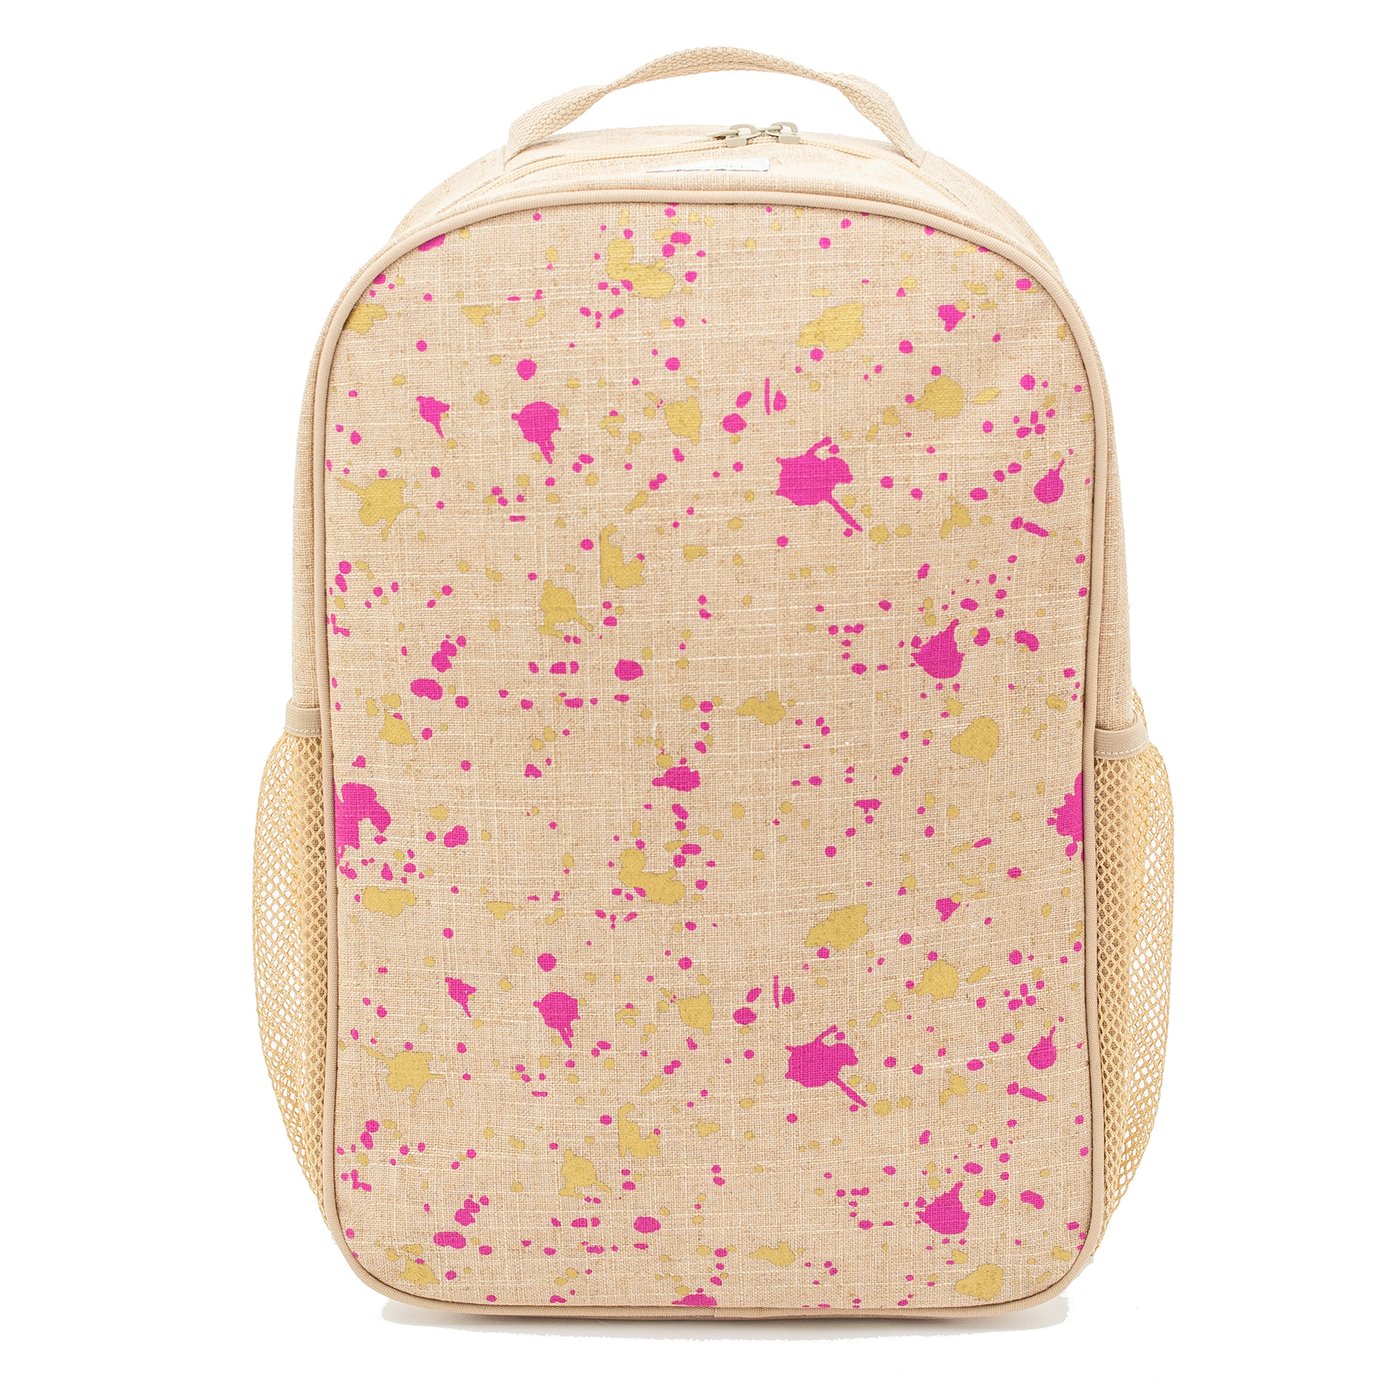 SO YOUNG - Fuchsia and Gold Splatter Grade School Backpack